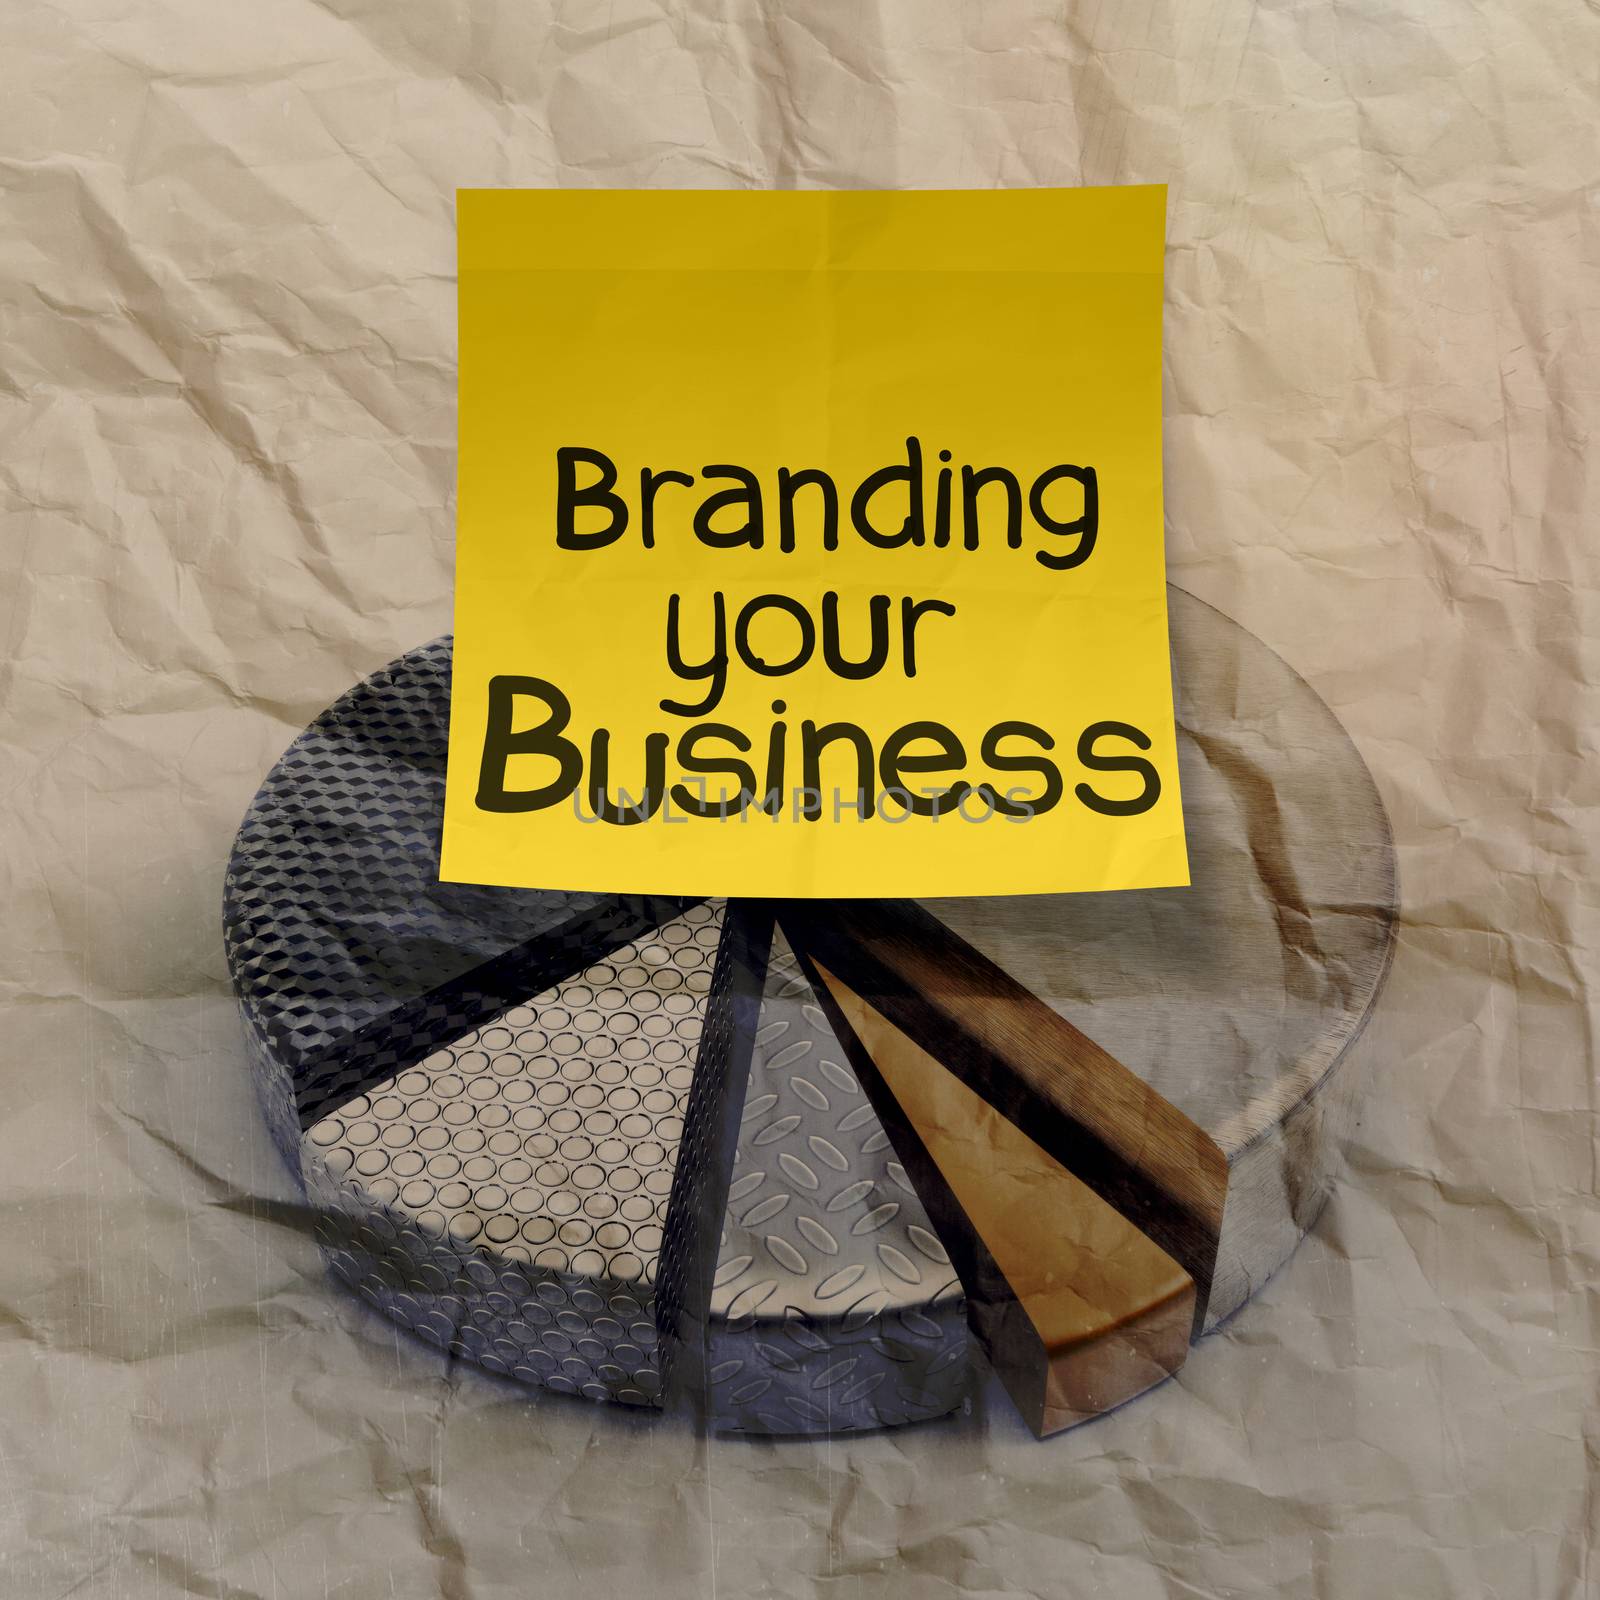  branding your business with pie chart crumpled recycle paper  by everythingpossible